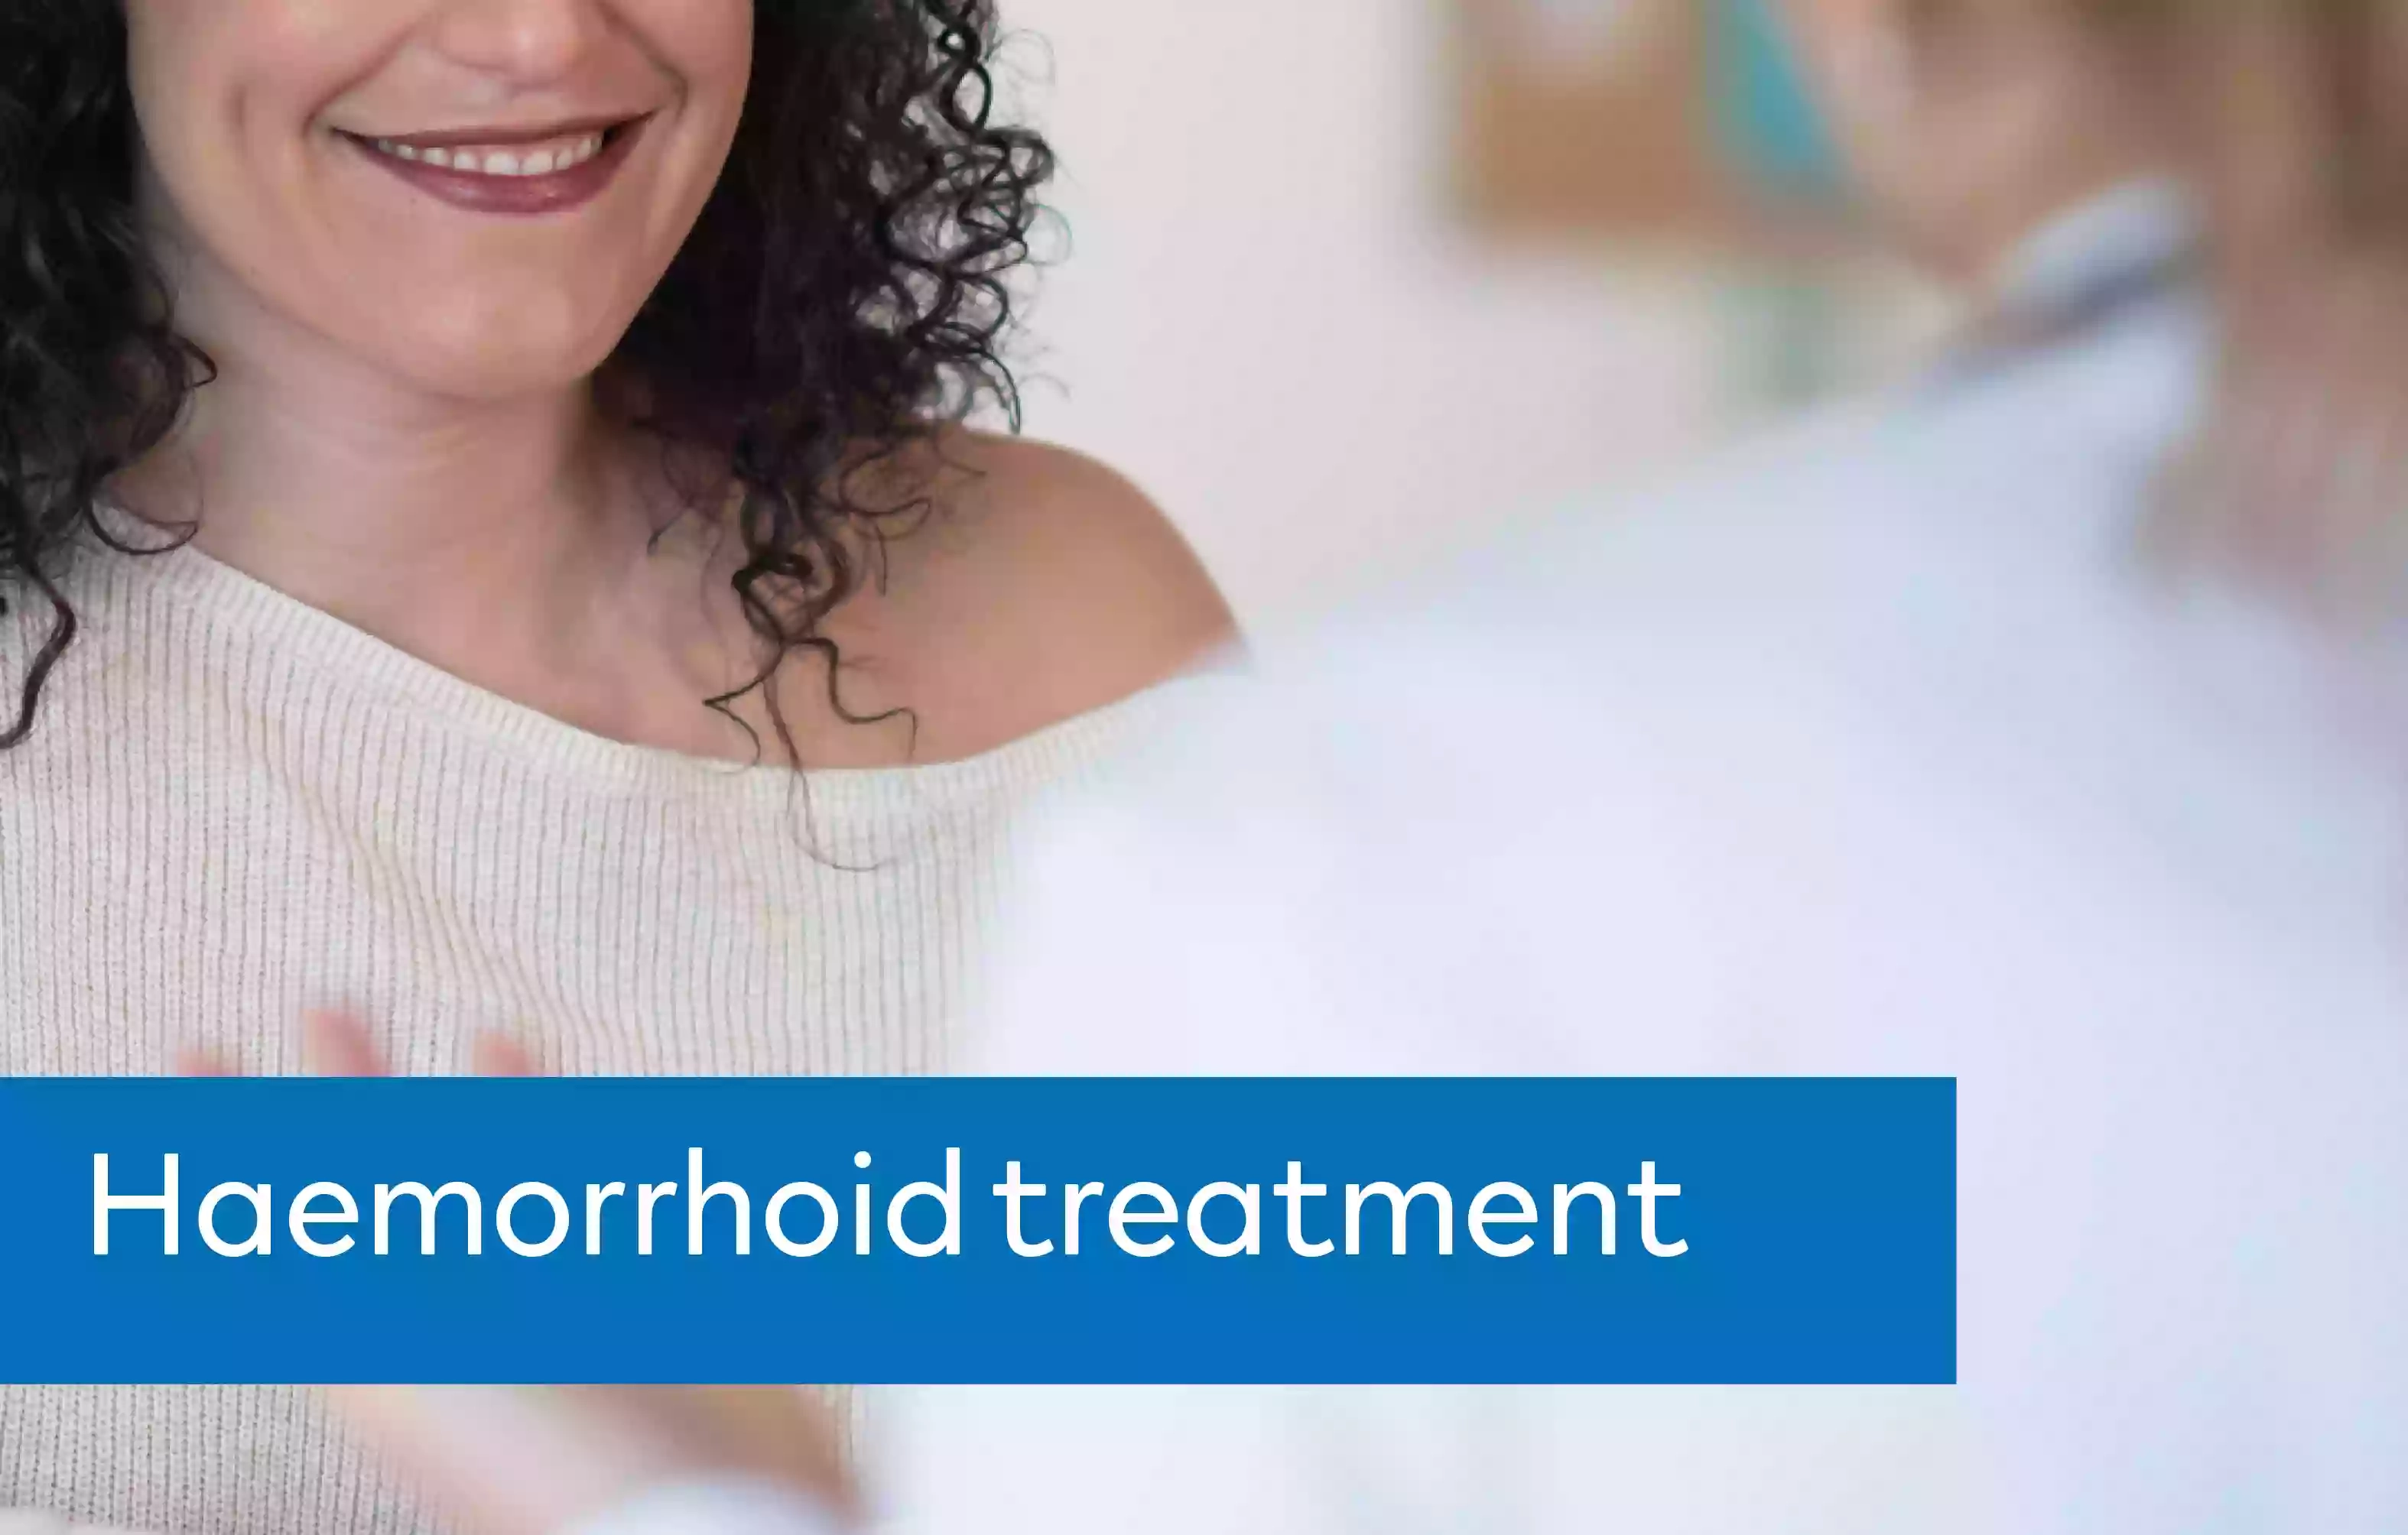 Horizon Clinic - piles and haemorrhoid treatment specialist in Norwich, Norfolk